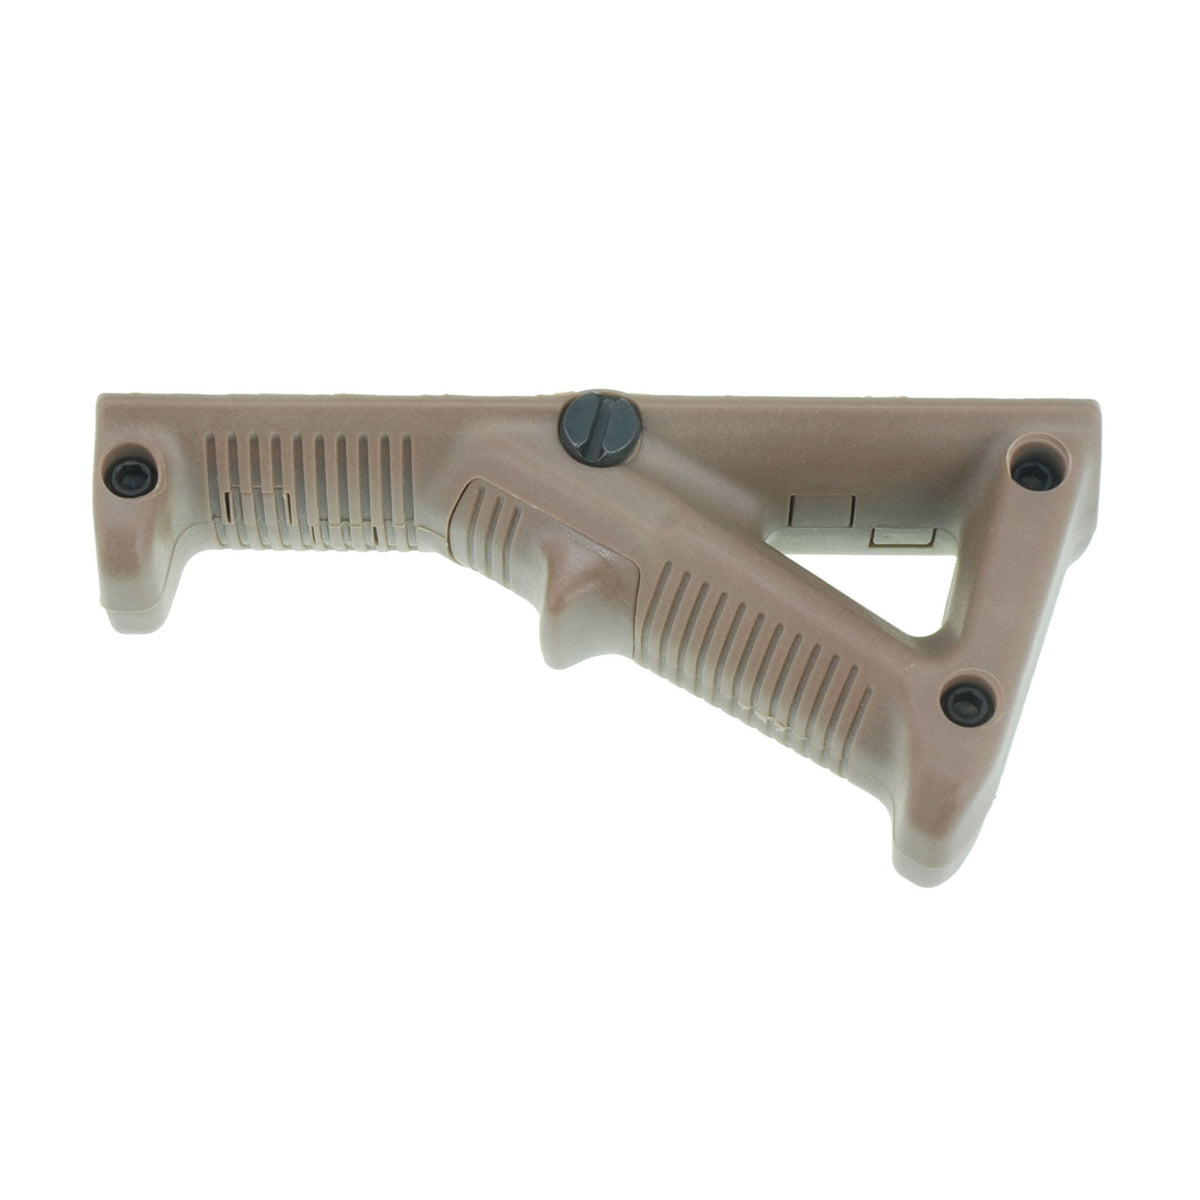 MP Style Angled Foregrip